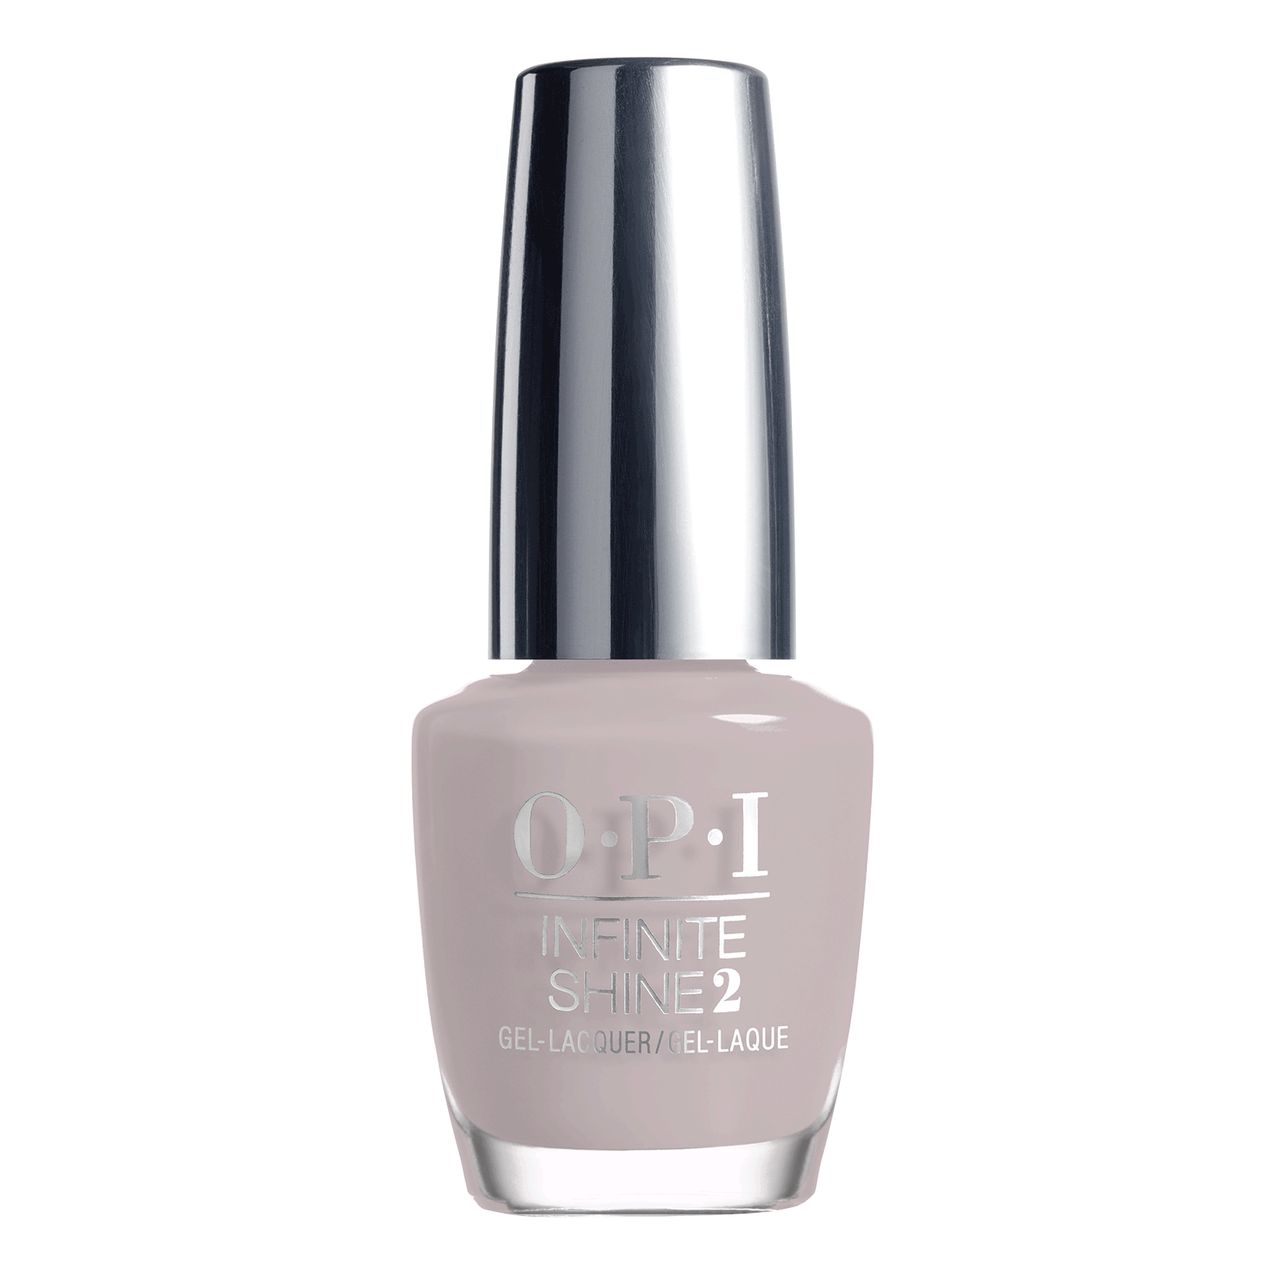 OPI Made Your Look 